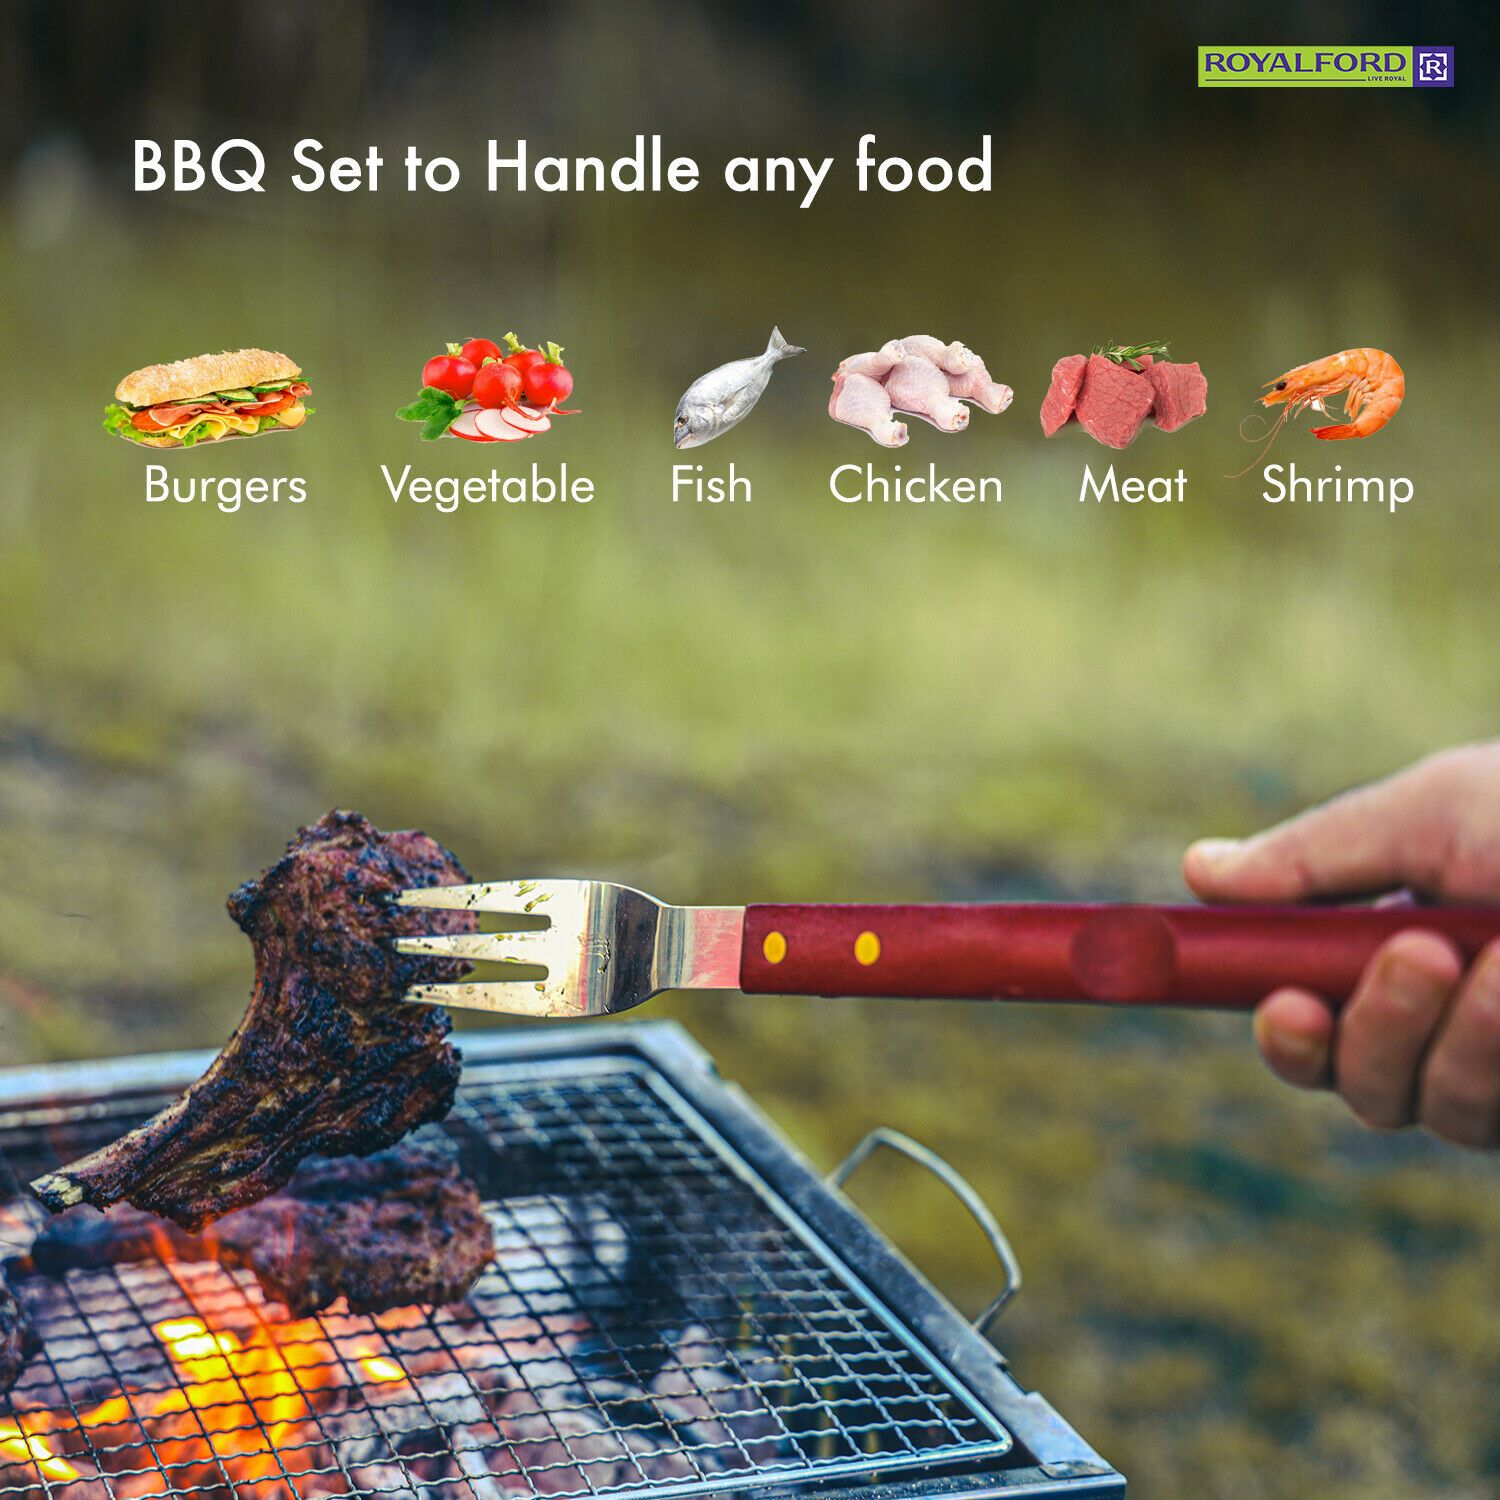 BBQ Stainless Steel Barbeque Utensils Grill Tool Set By Royalford Royalford 